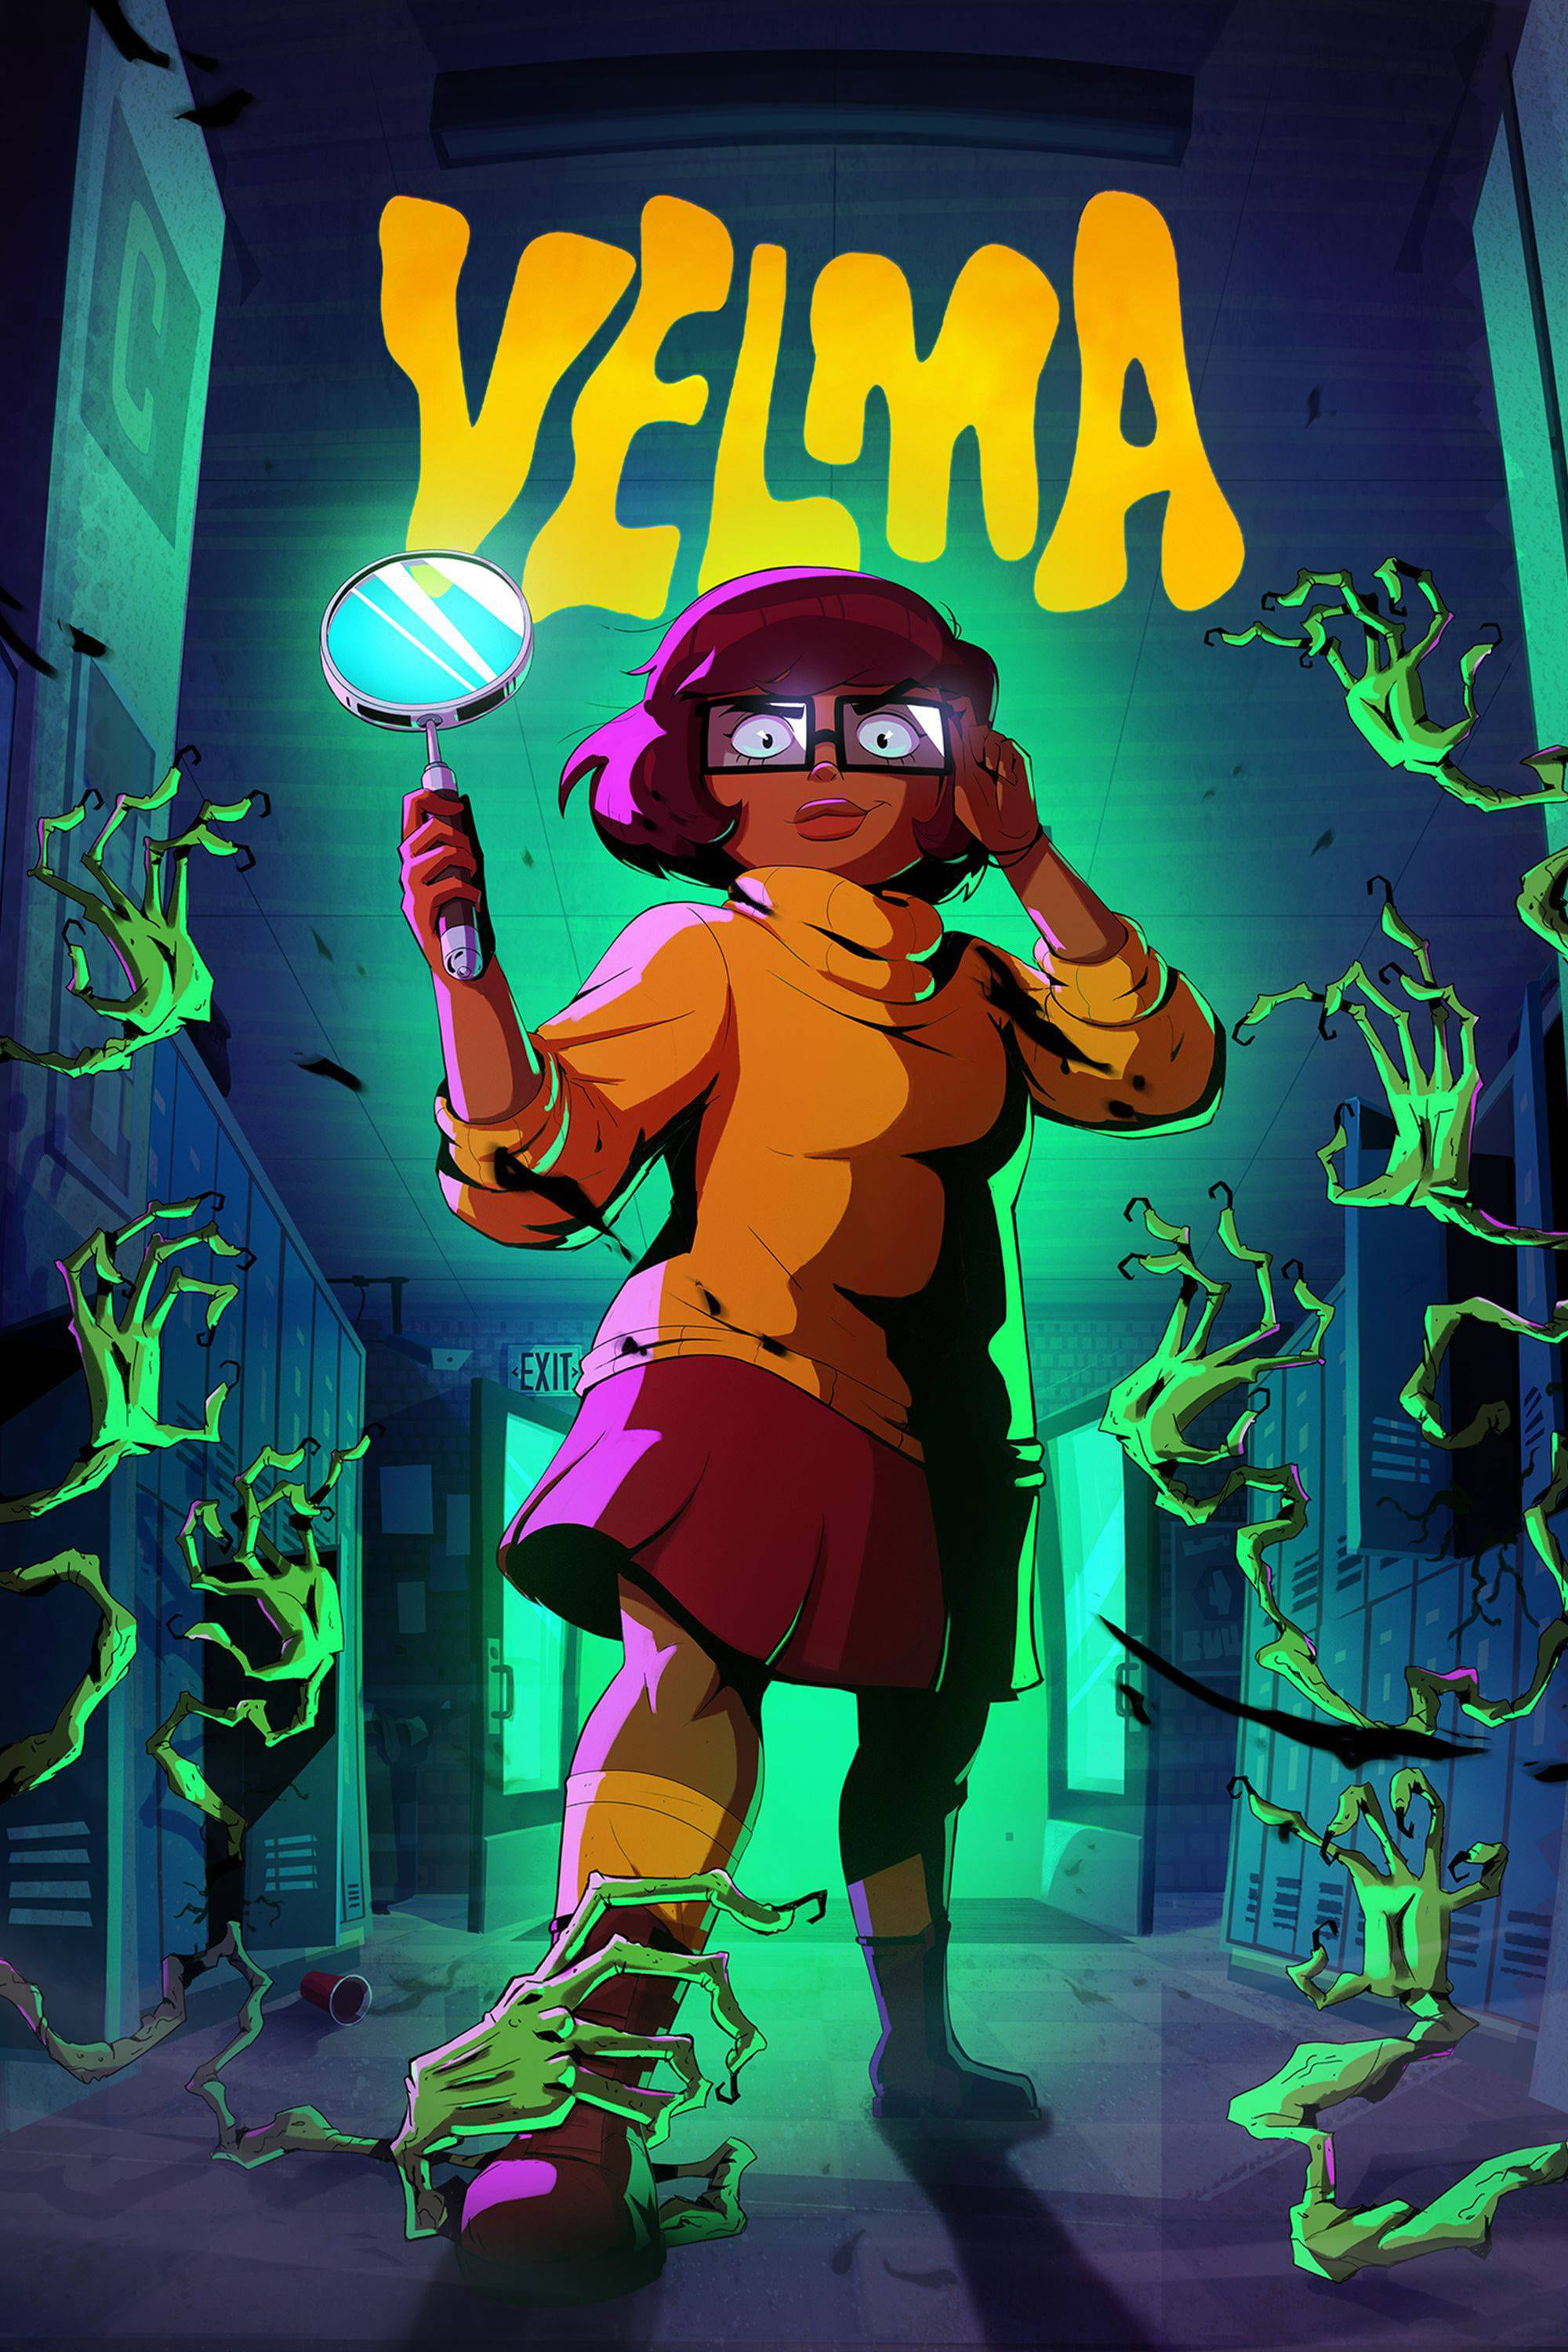 Velma TV Shows About Adult Animation